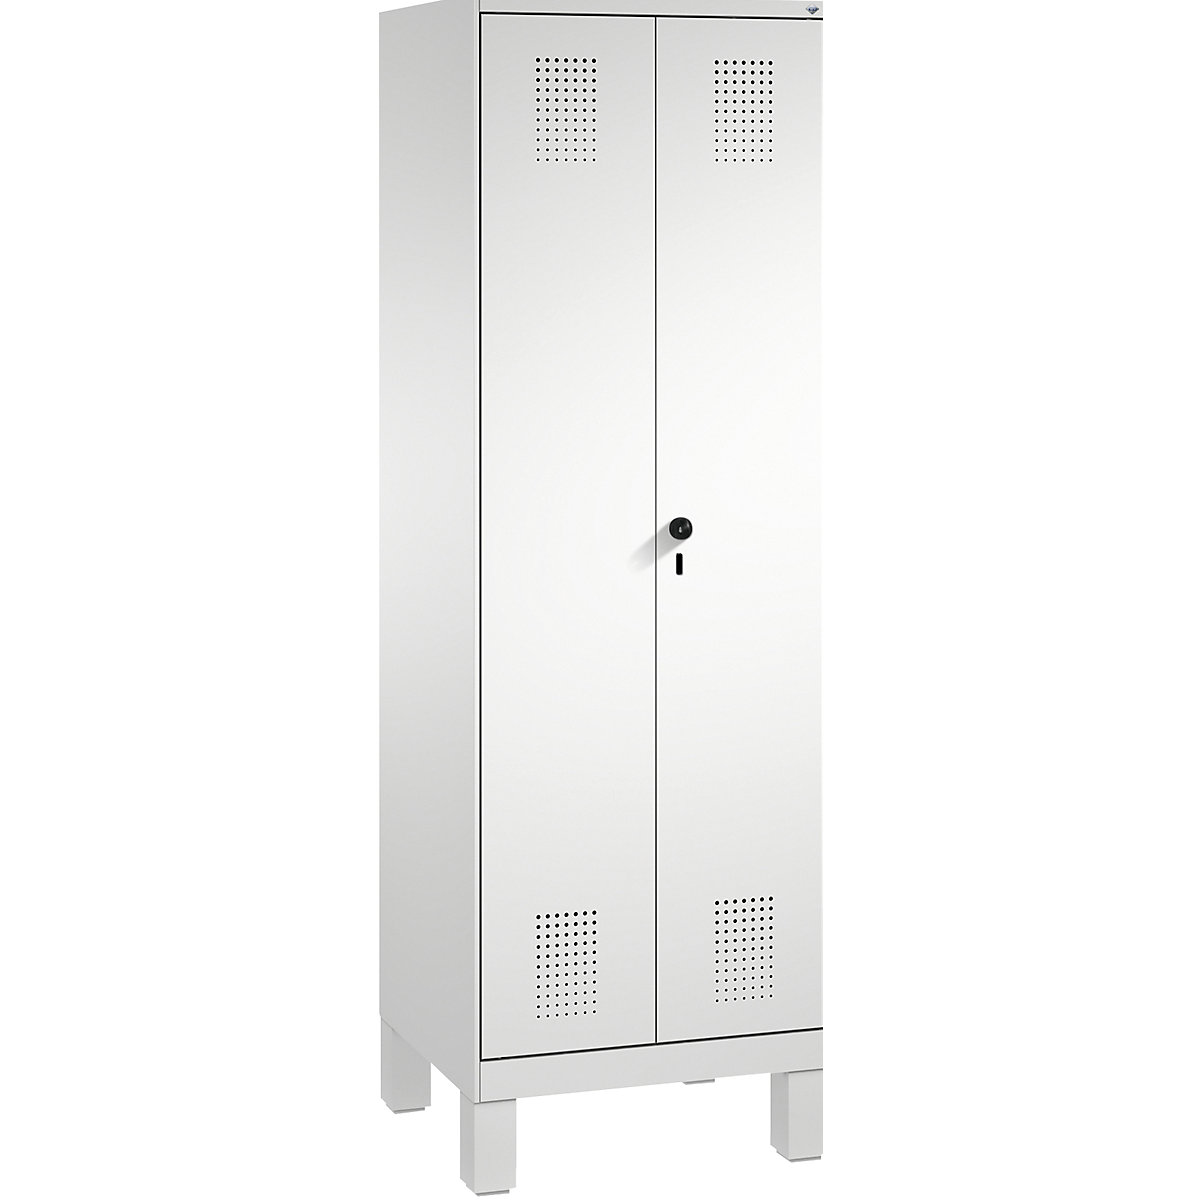 EVOLO laundry cupboard / cloakroom locker – C+P, 4 shelves, clothes rail, compartments 2 x 300 mm, with feet, light grey-6